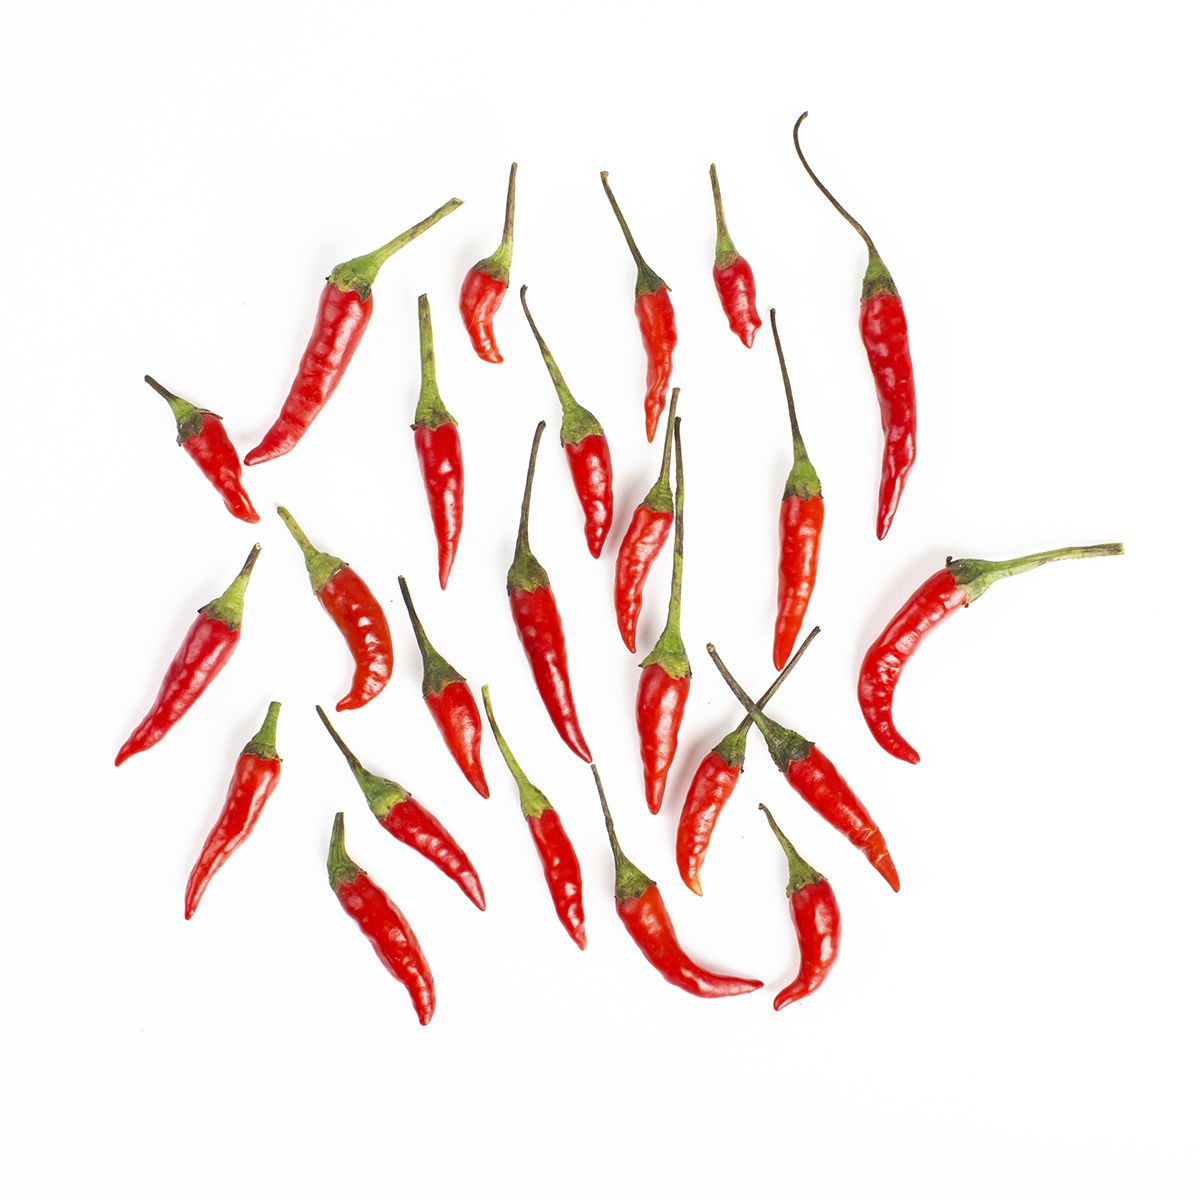 BoxNCase Red Thai Bird Chili Peppers 1 lb